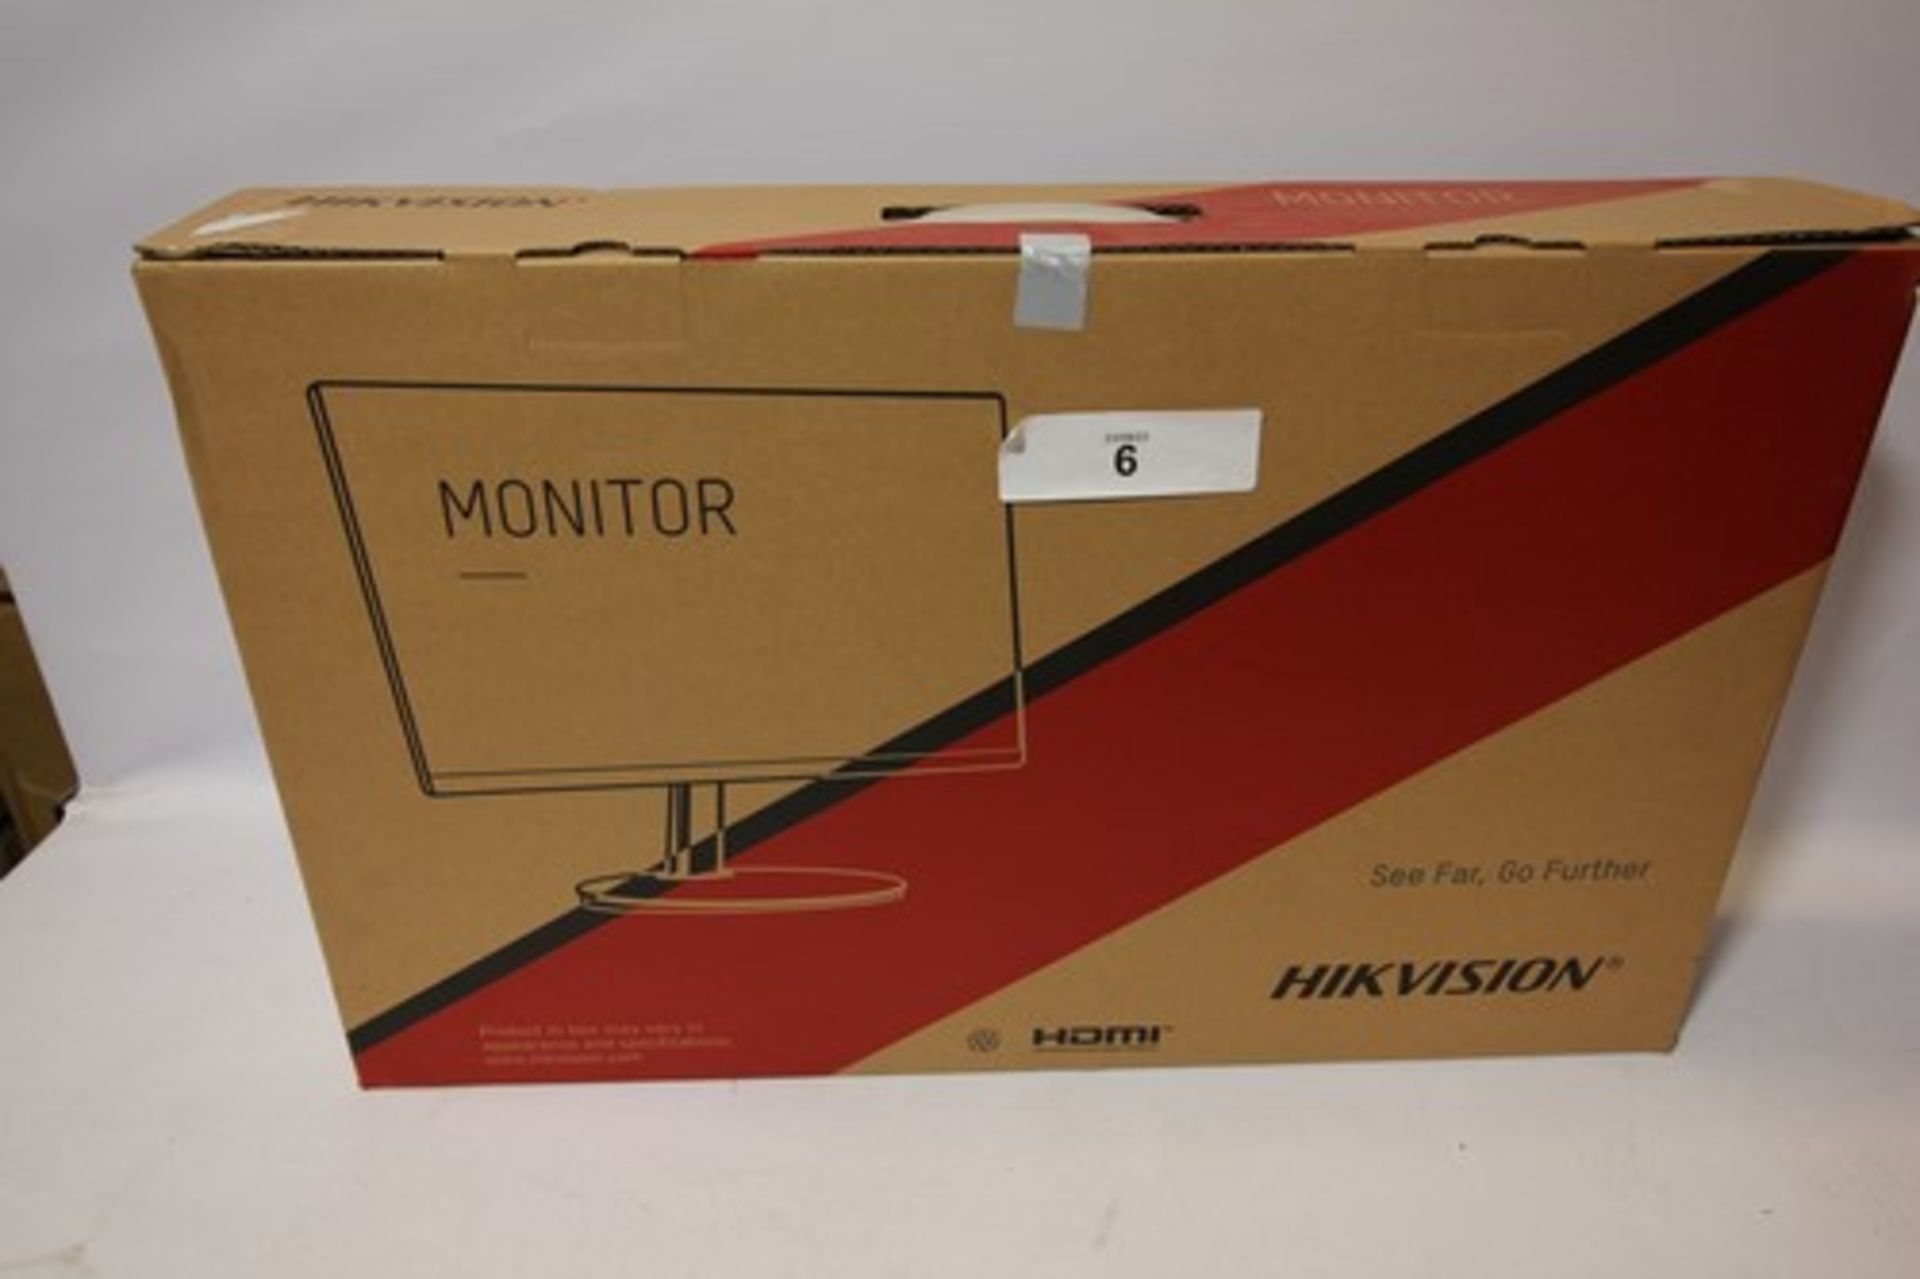 1 x Hikvision CCTC monitor, Model DS-D5022FN-C - Sealed new in box (GS1)